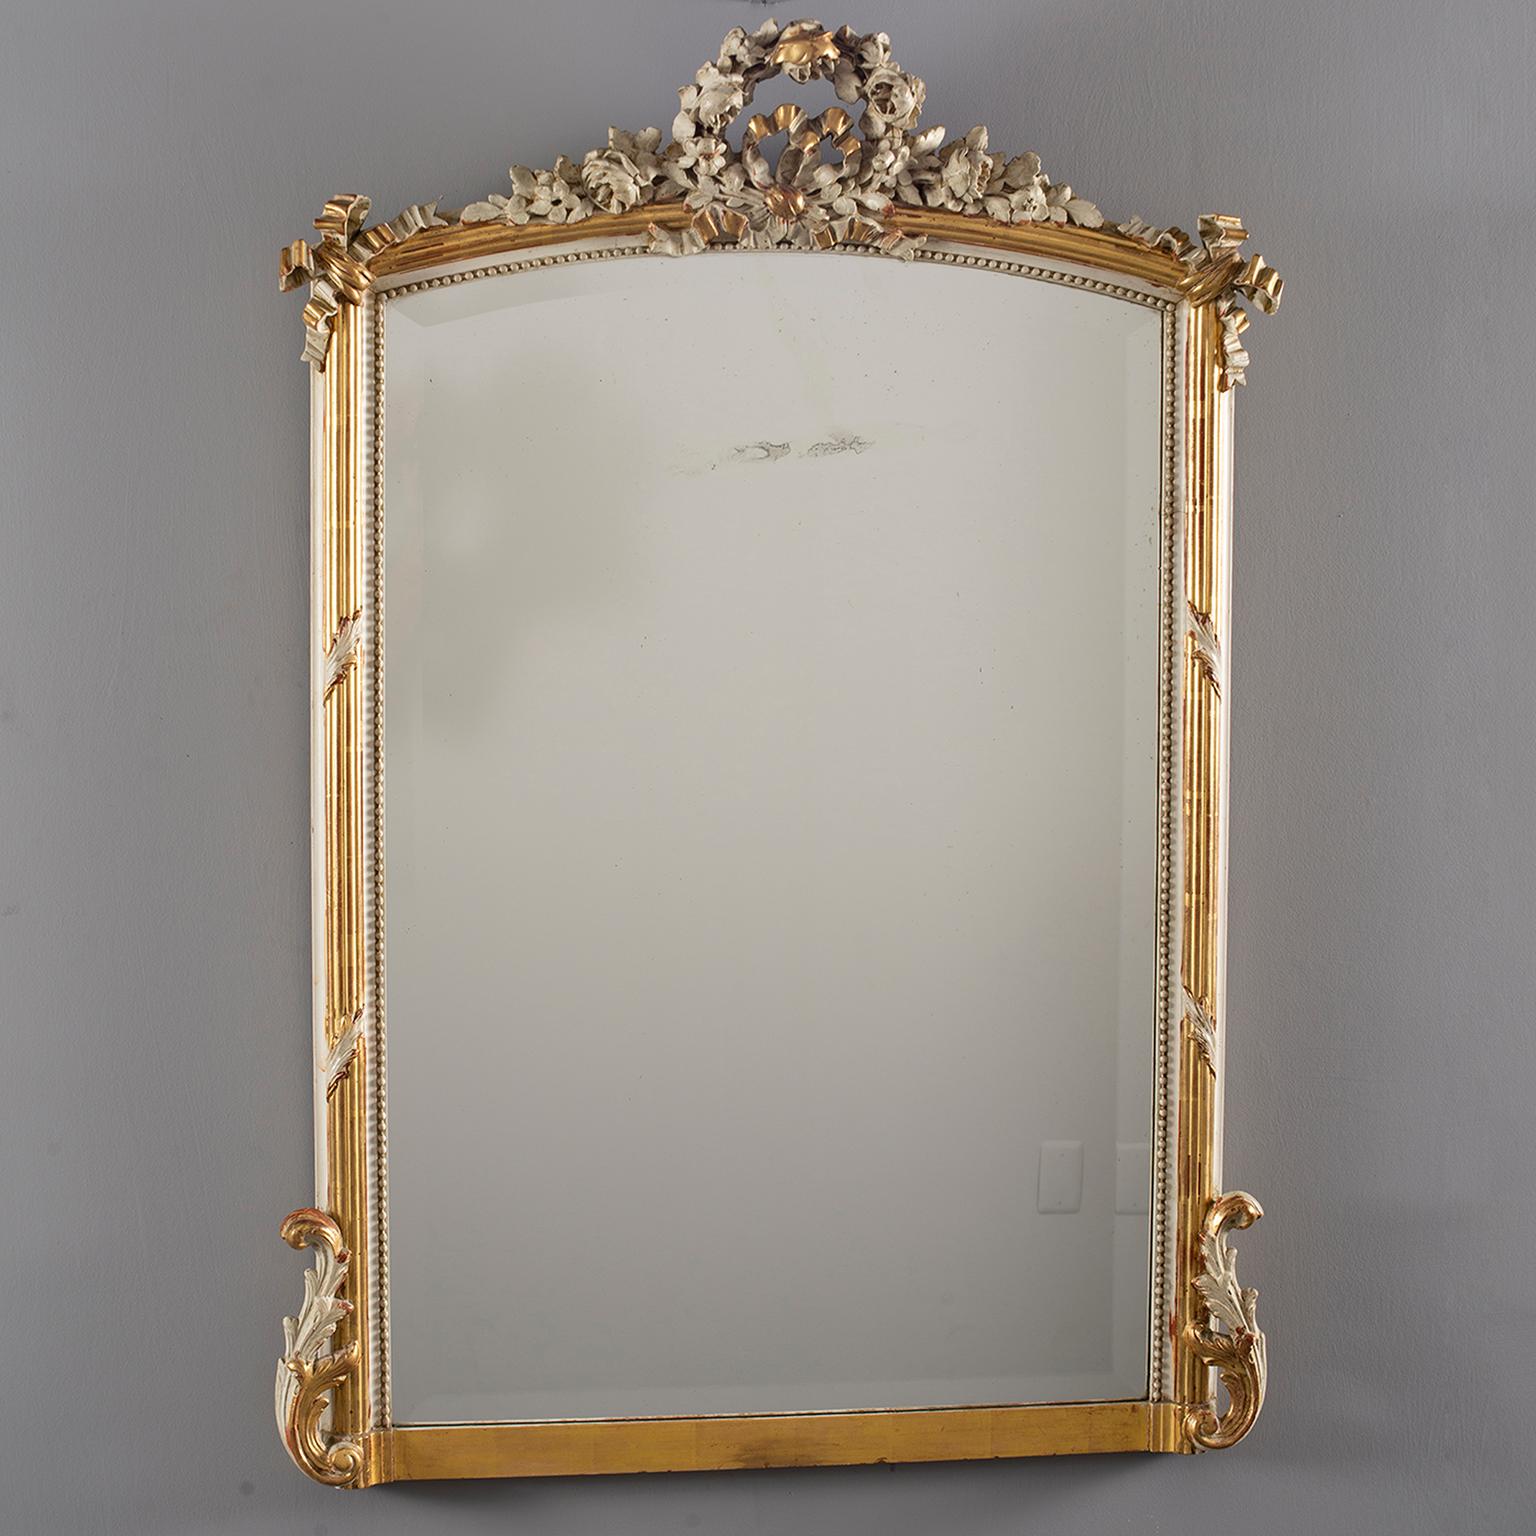 French Louis XVI style mirror has wood frame with cream color and gilded finish. Detailed decorations at bottom corners and wreath form crest, circa 1880s. Beaded inner edge, mirror is newer. Overall very good antique condition with some scattered